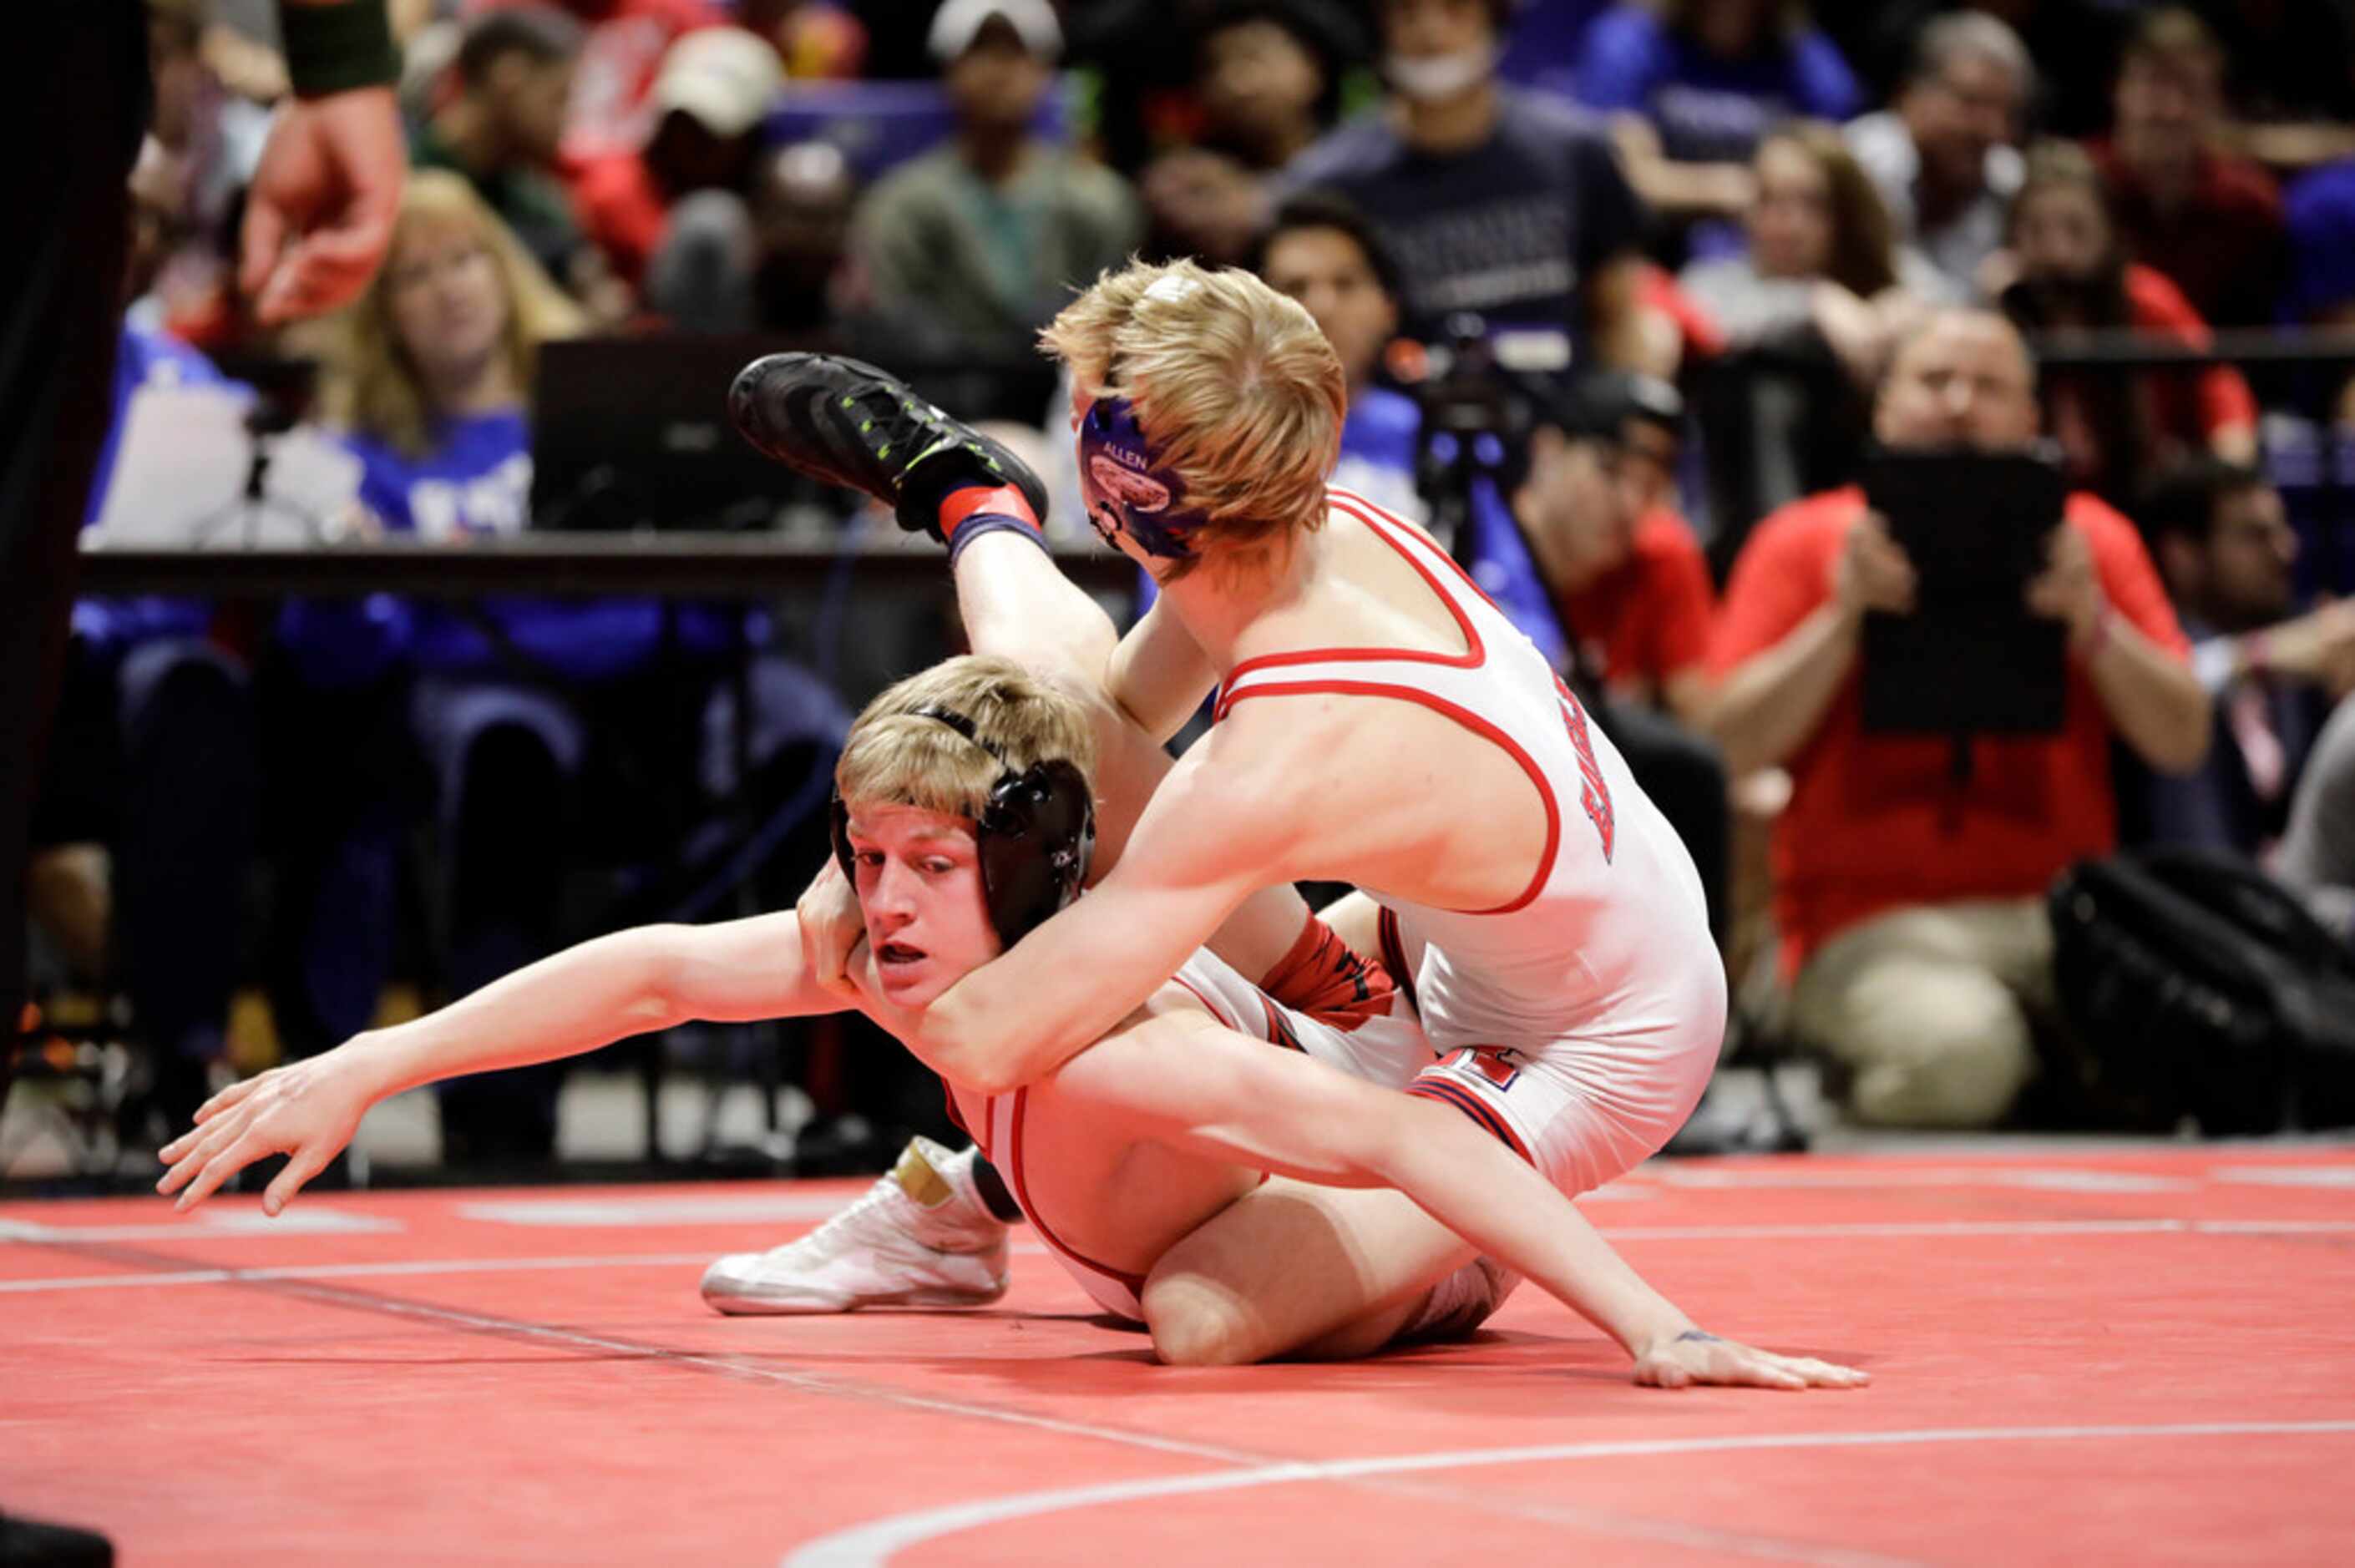 Braxton Brown of Allen wrestles during the UIL Texas State Wrestling Championships,...